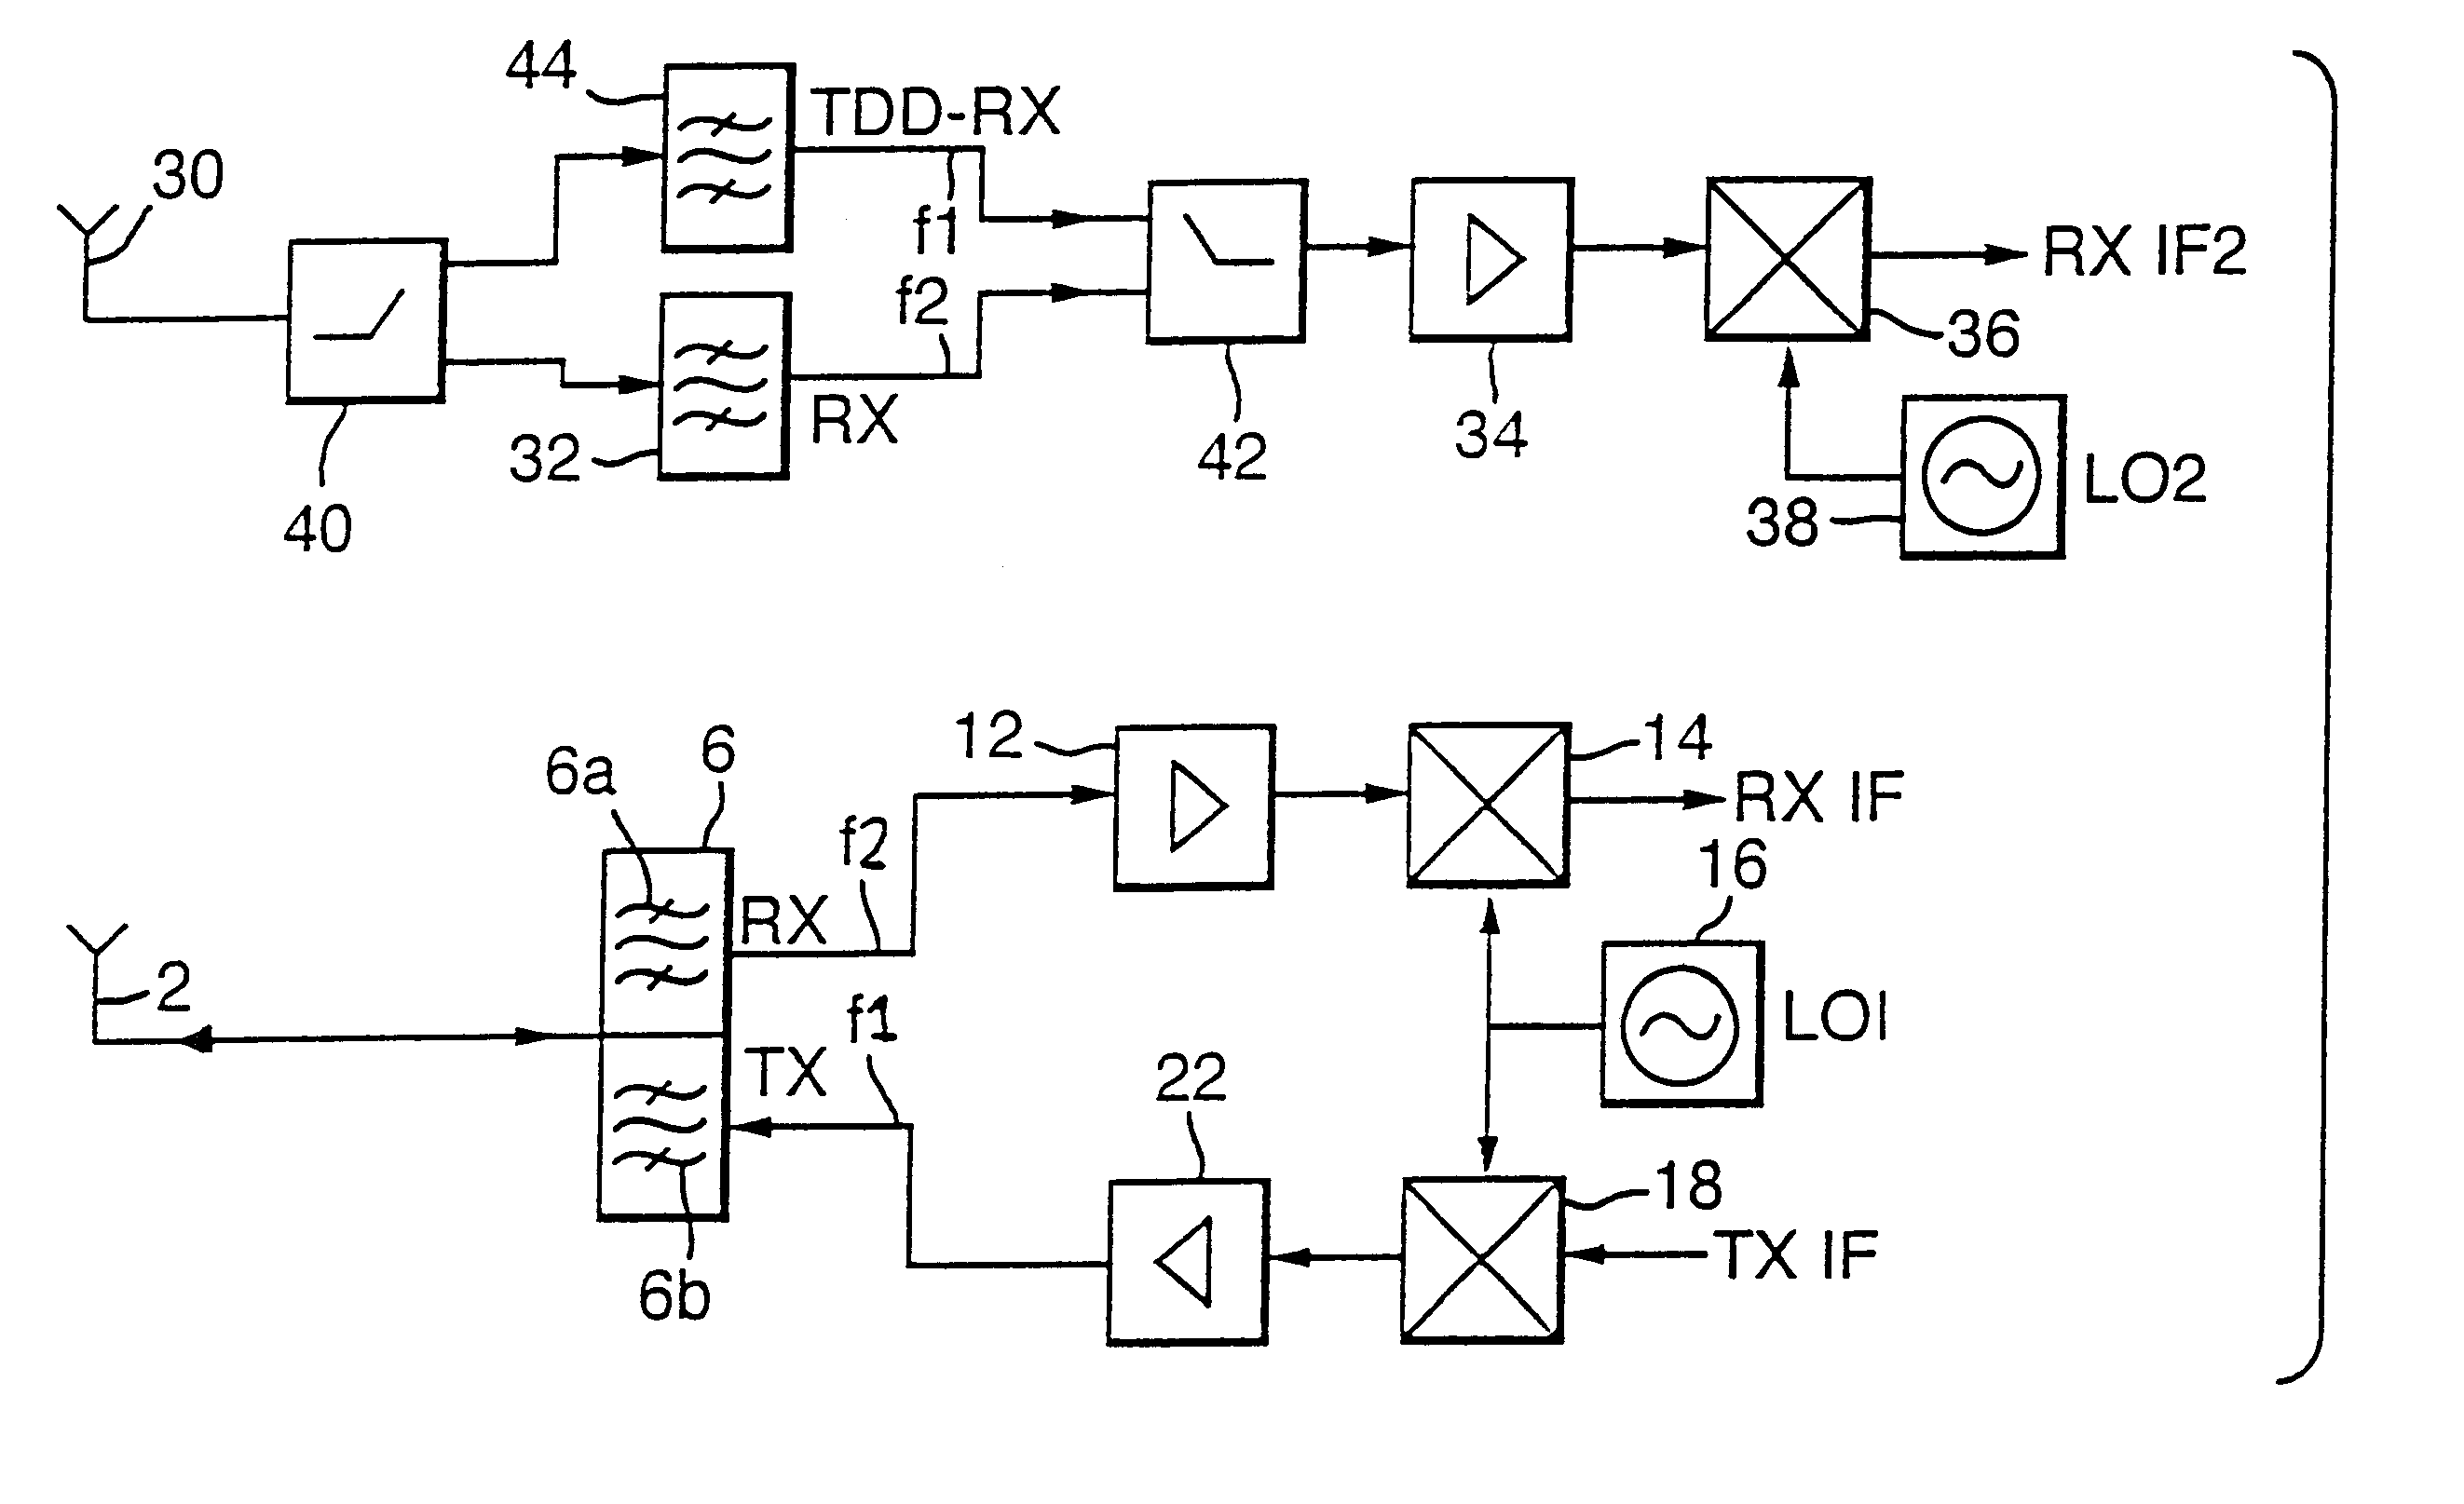 Wireless communication transceiver having a dual mode of operation